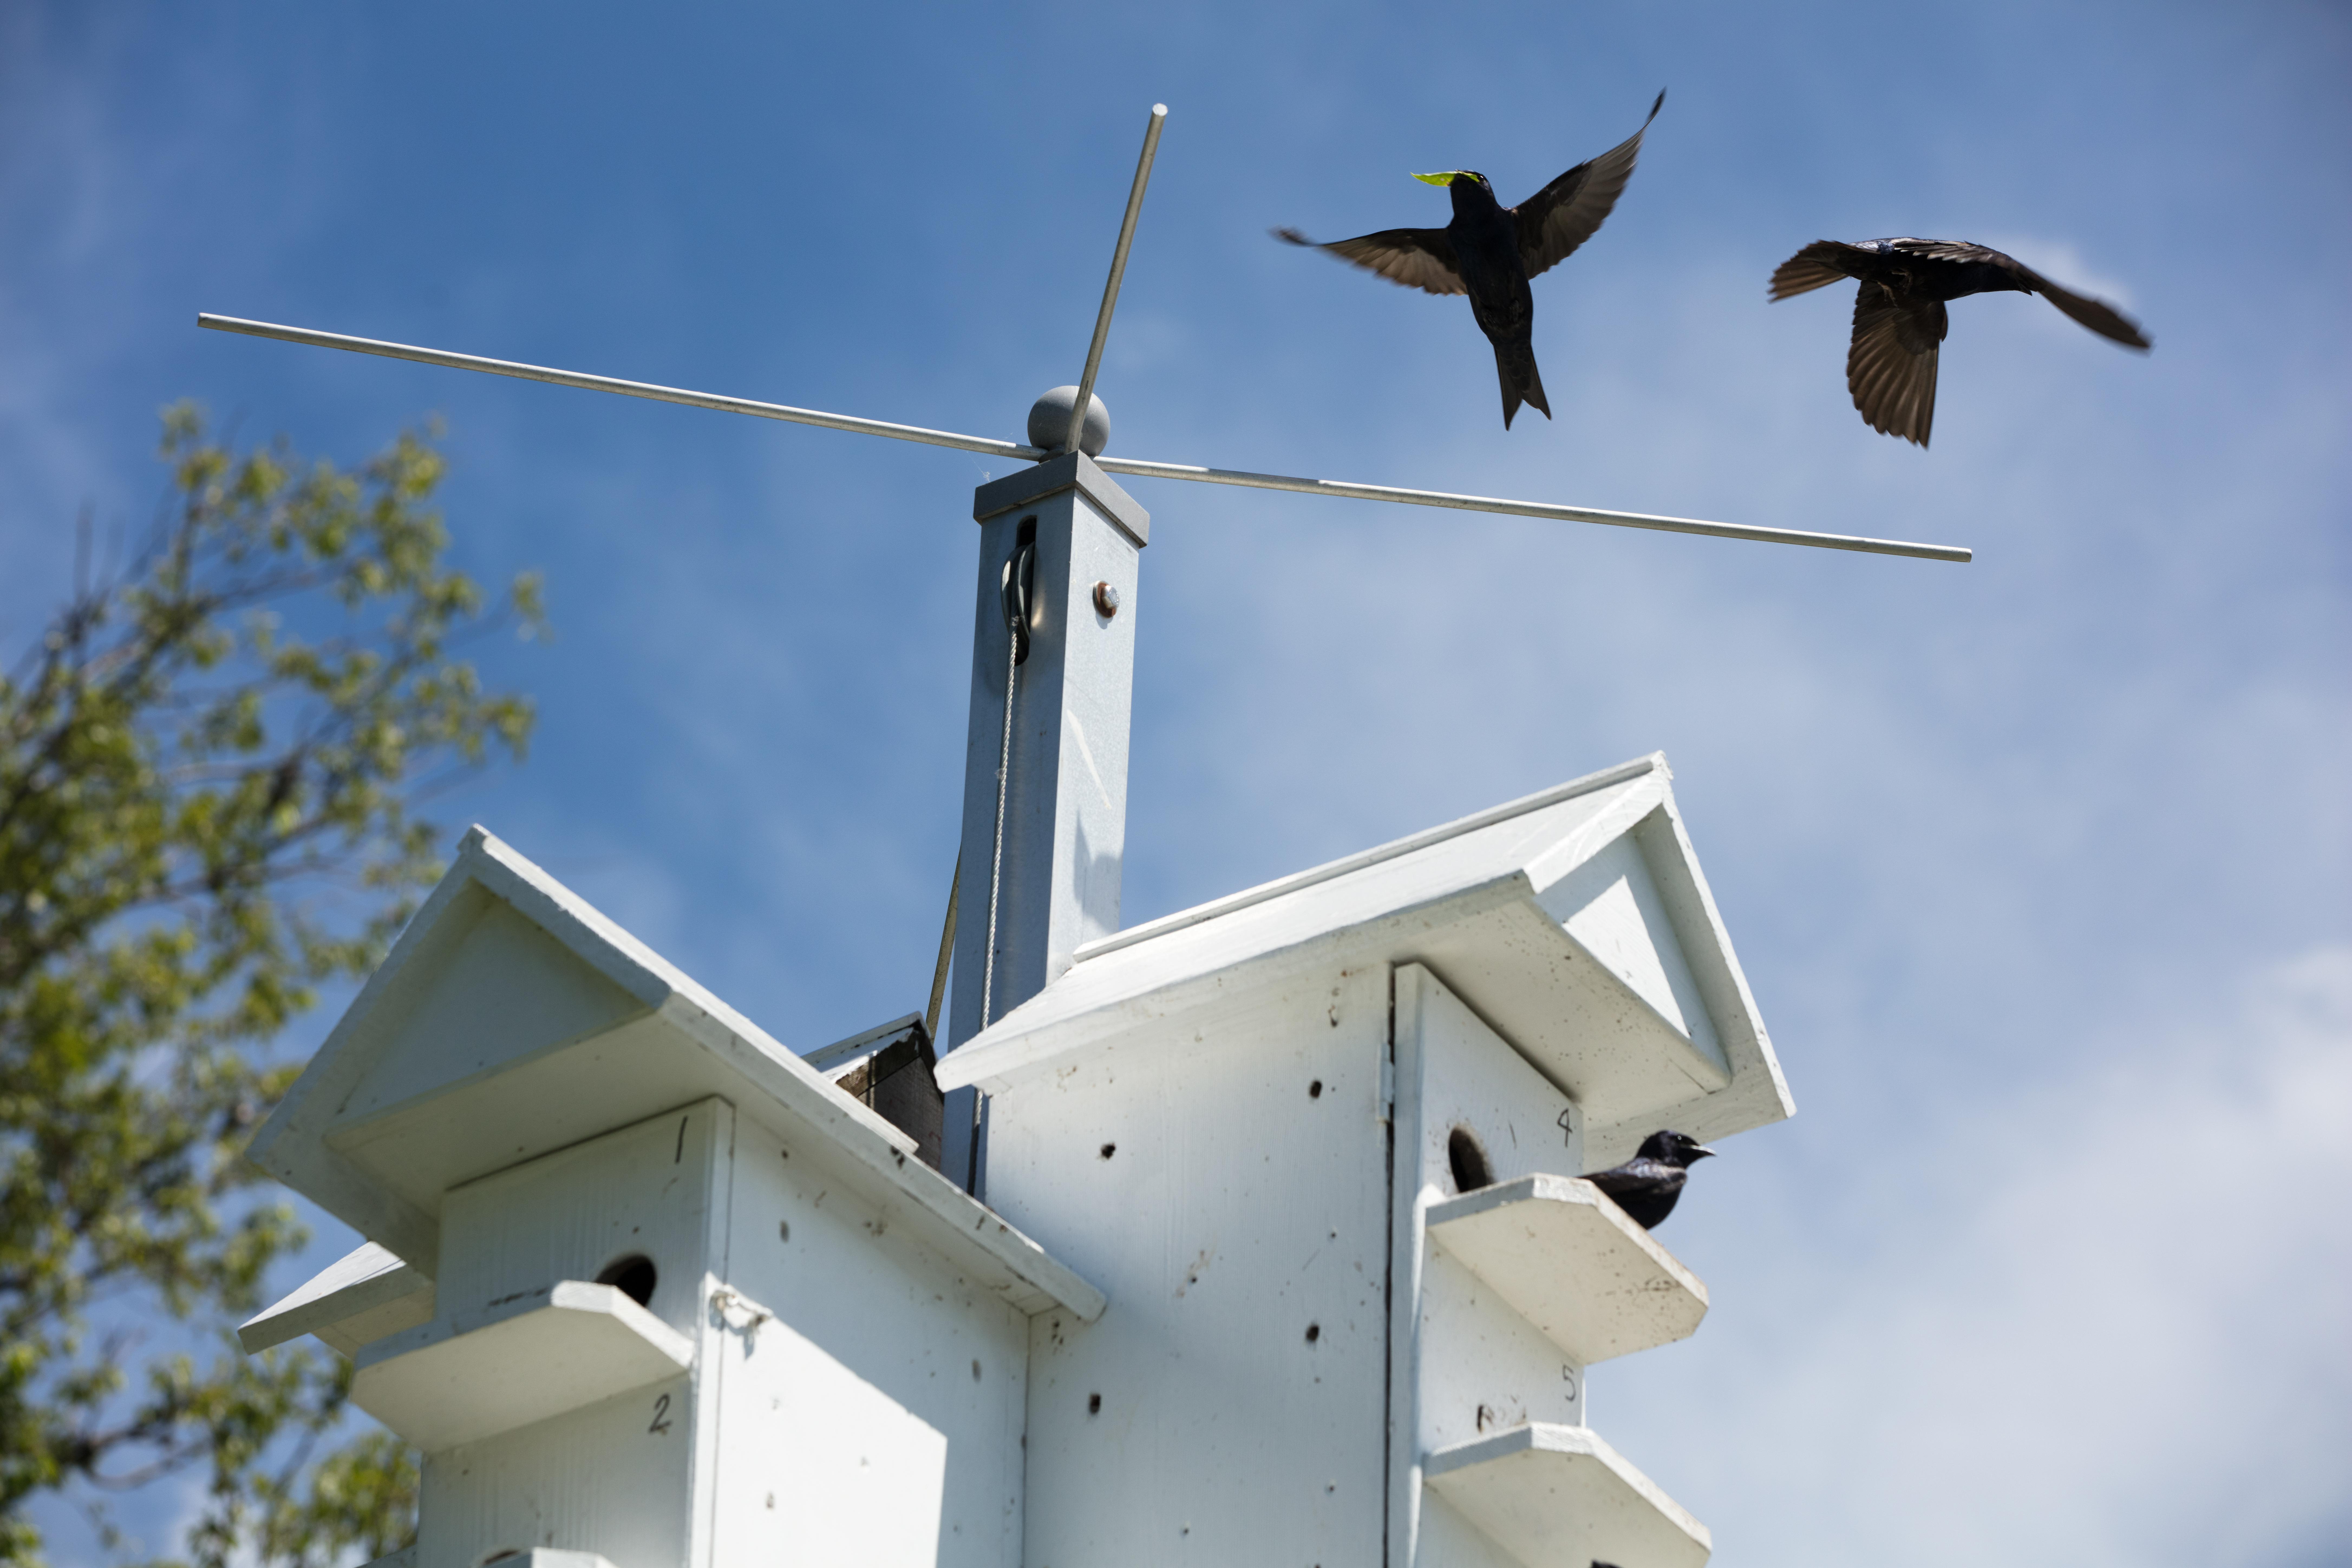 Purple Martin adults are flying above their house.